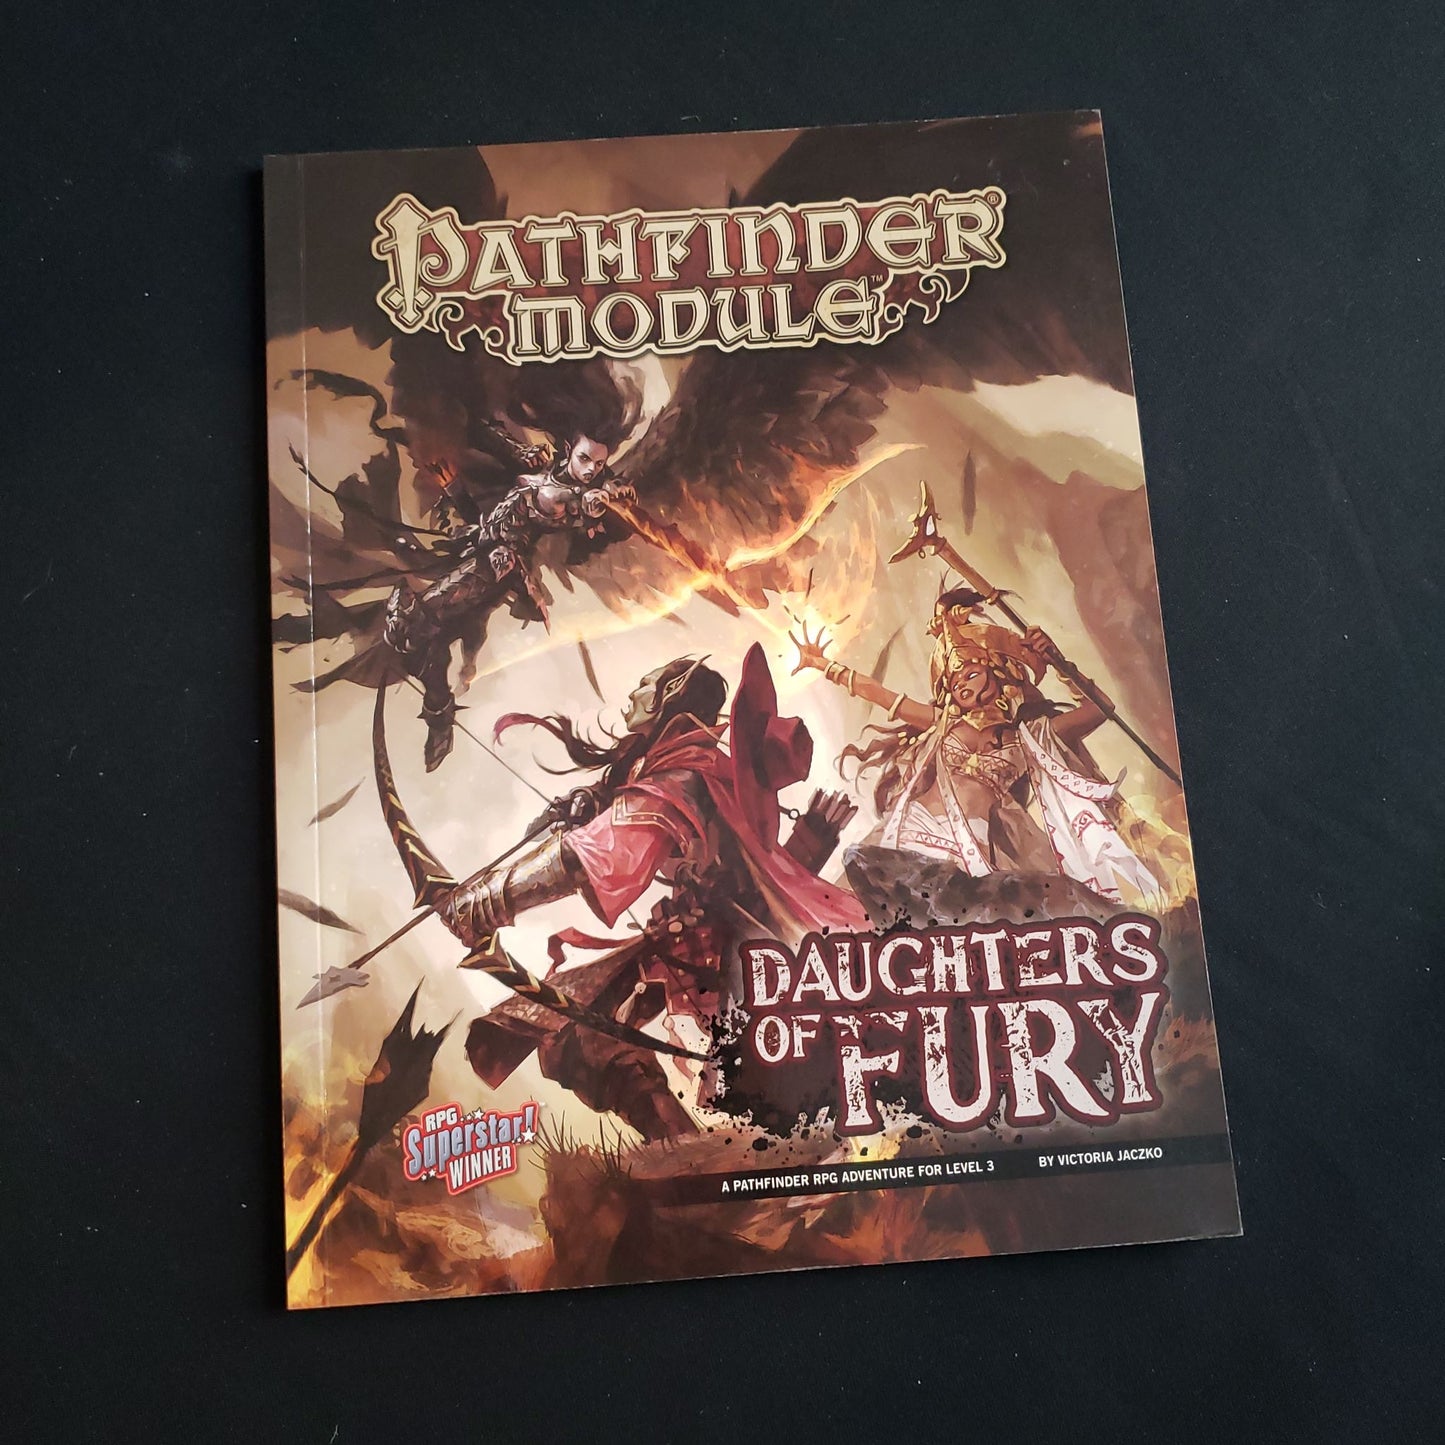 Image shows the front cover of the Daughters of Fury book for the Pathfinder First Edition roleplaying game